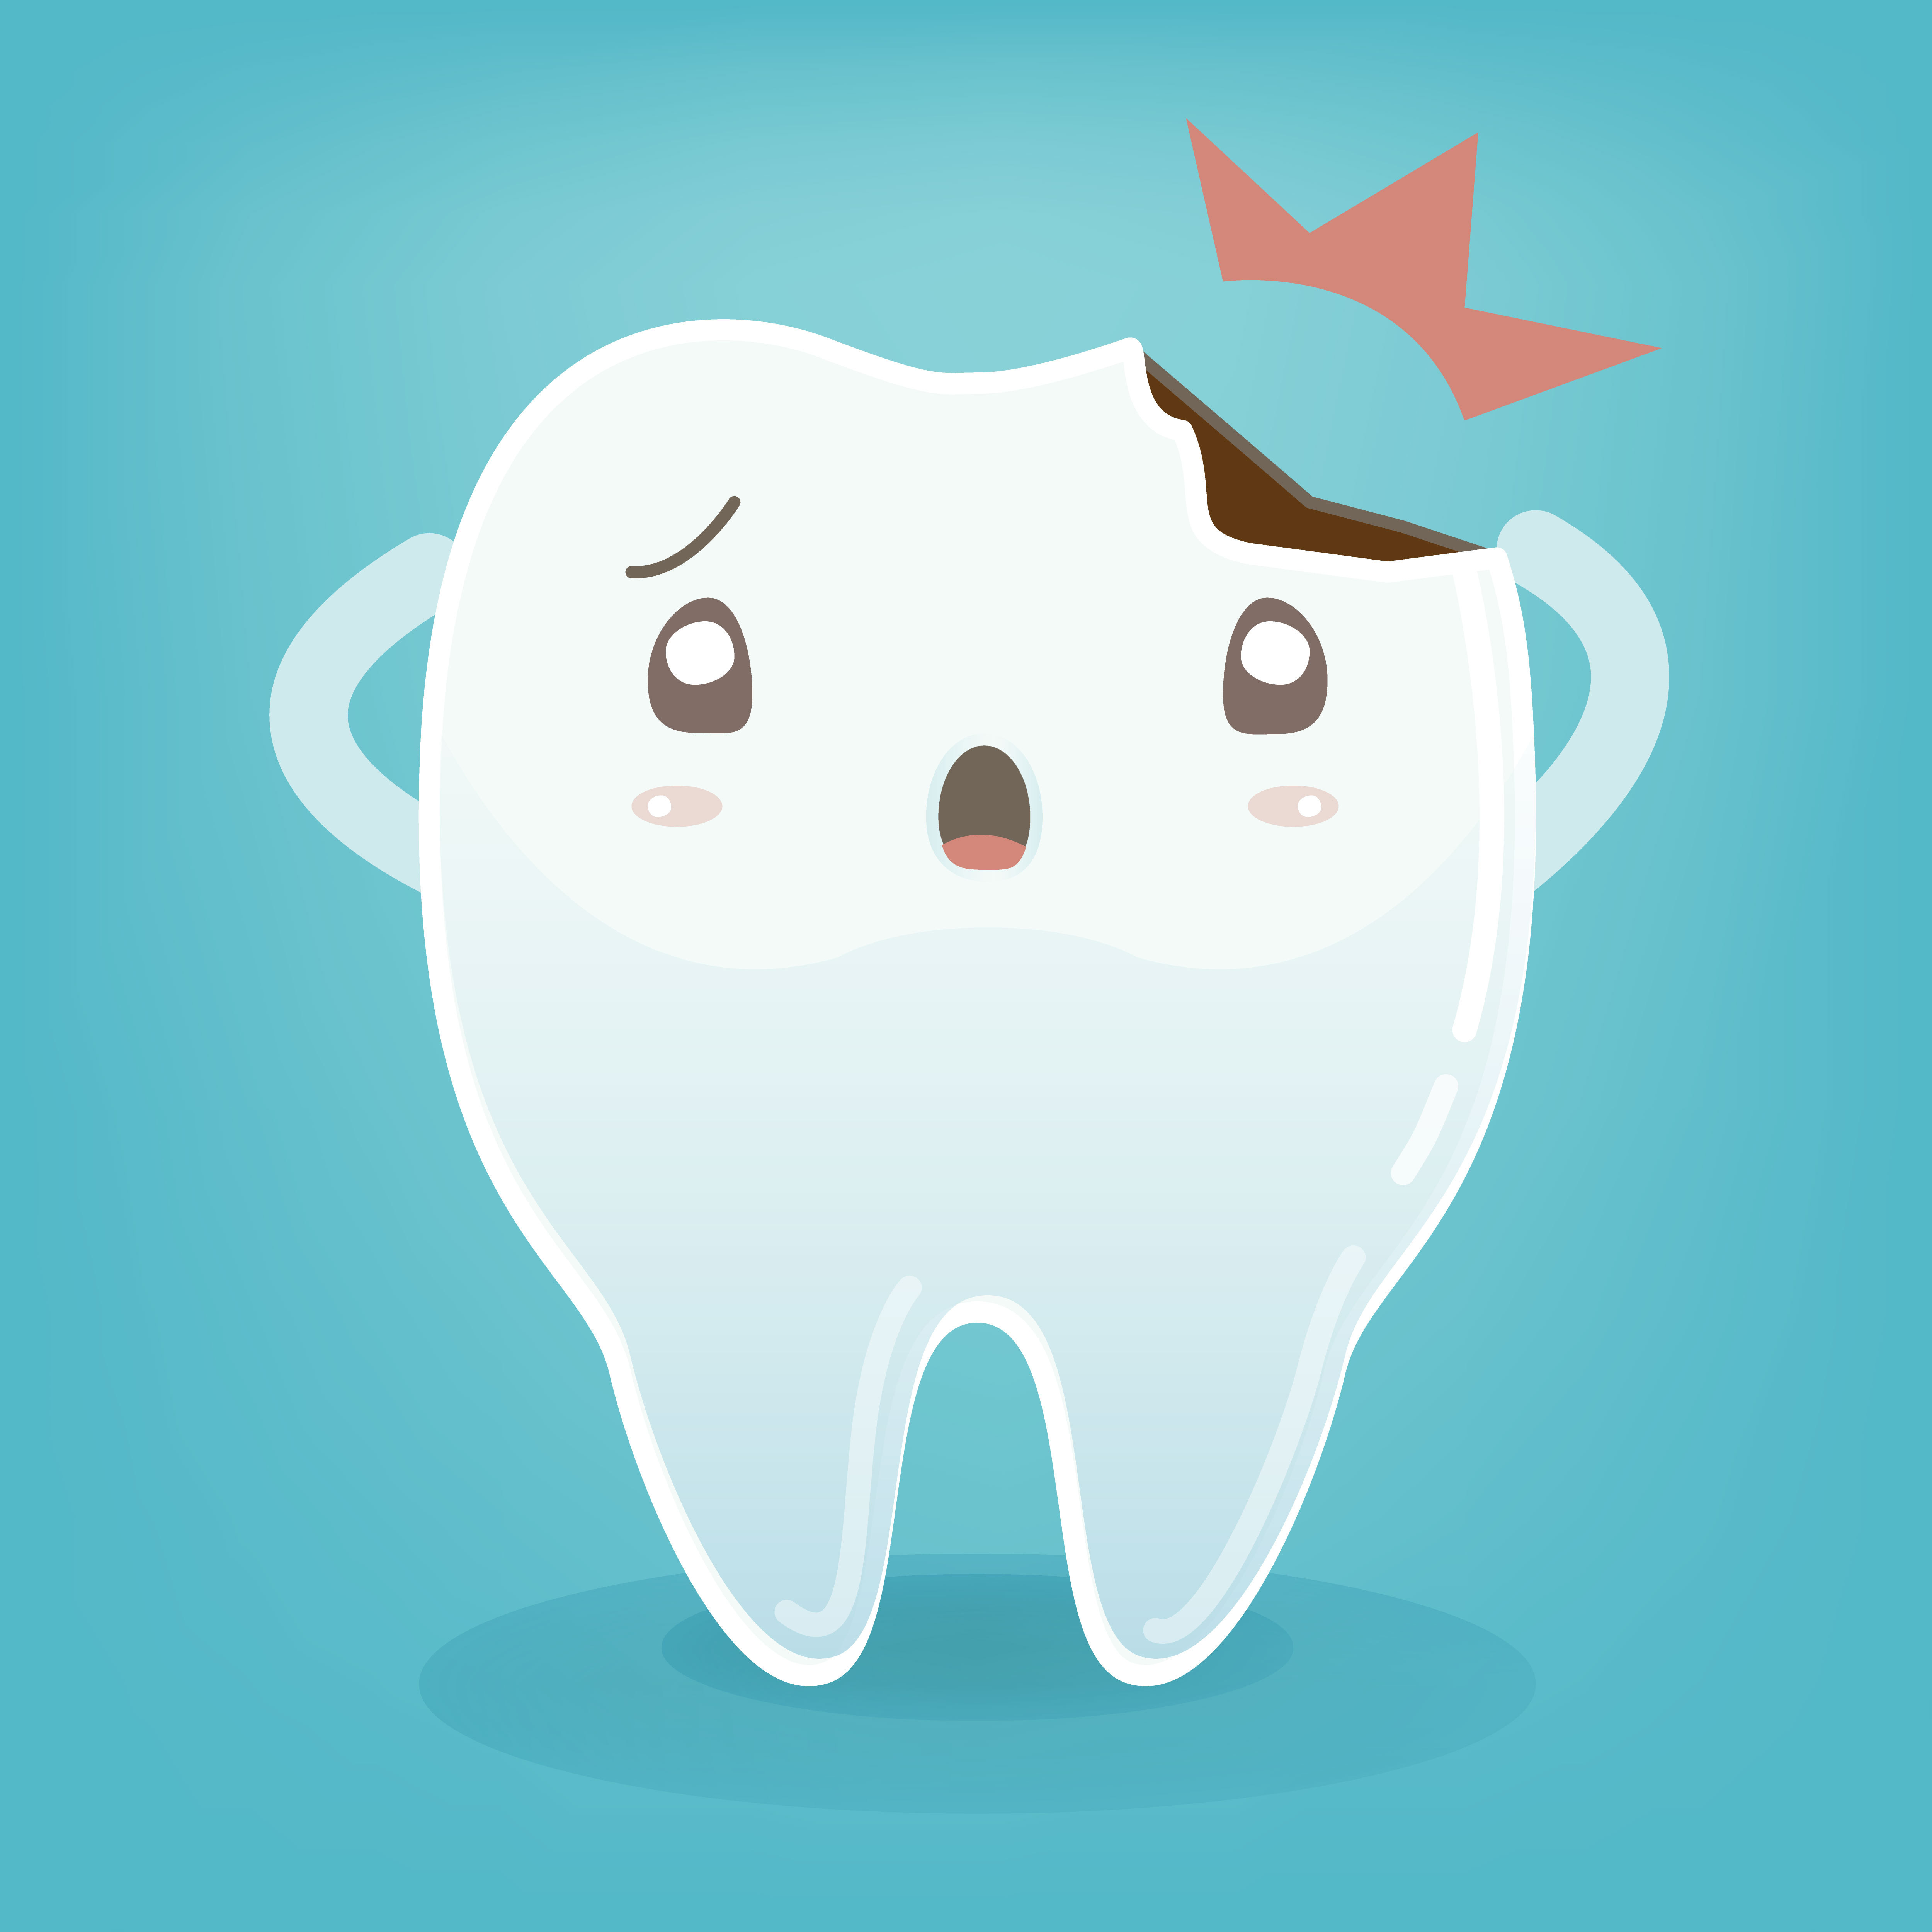 Cracked Tooth Repair - Dr. Stone, DDS